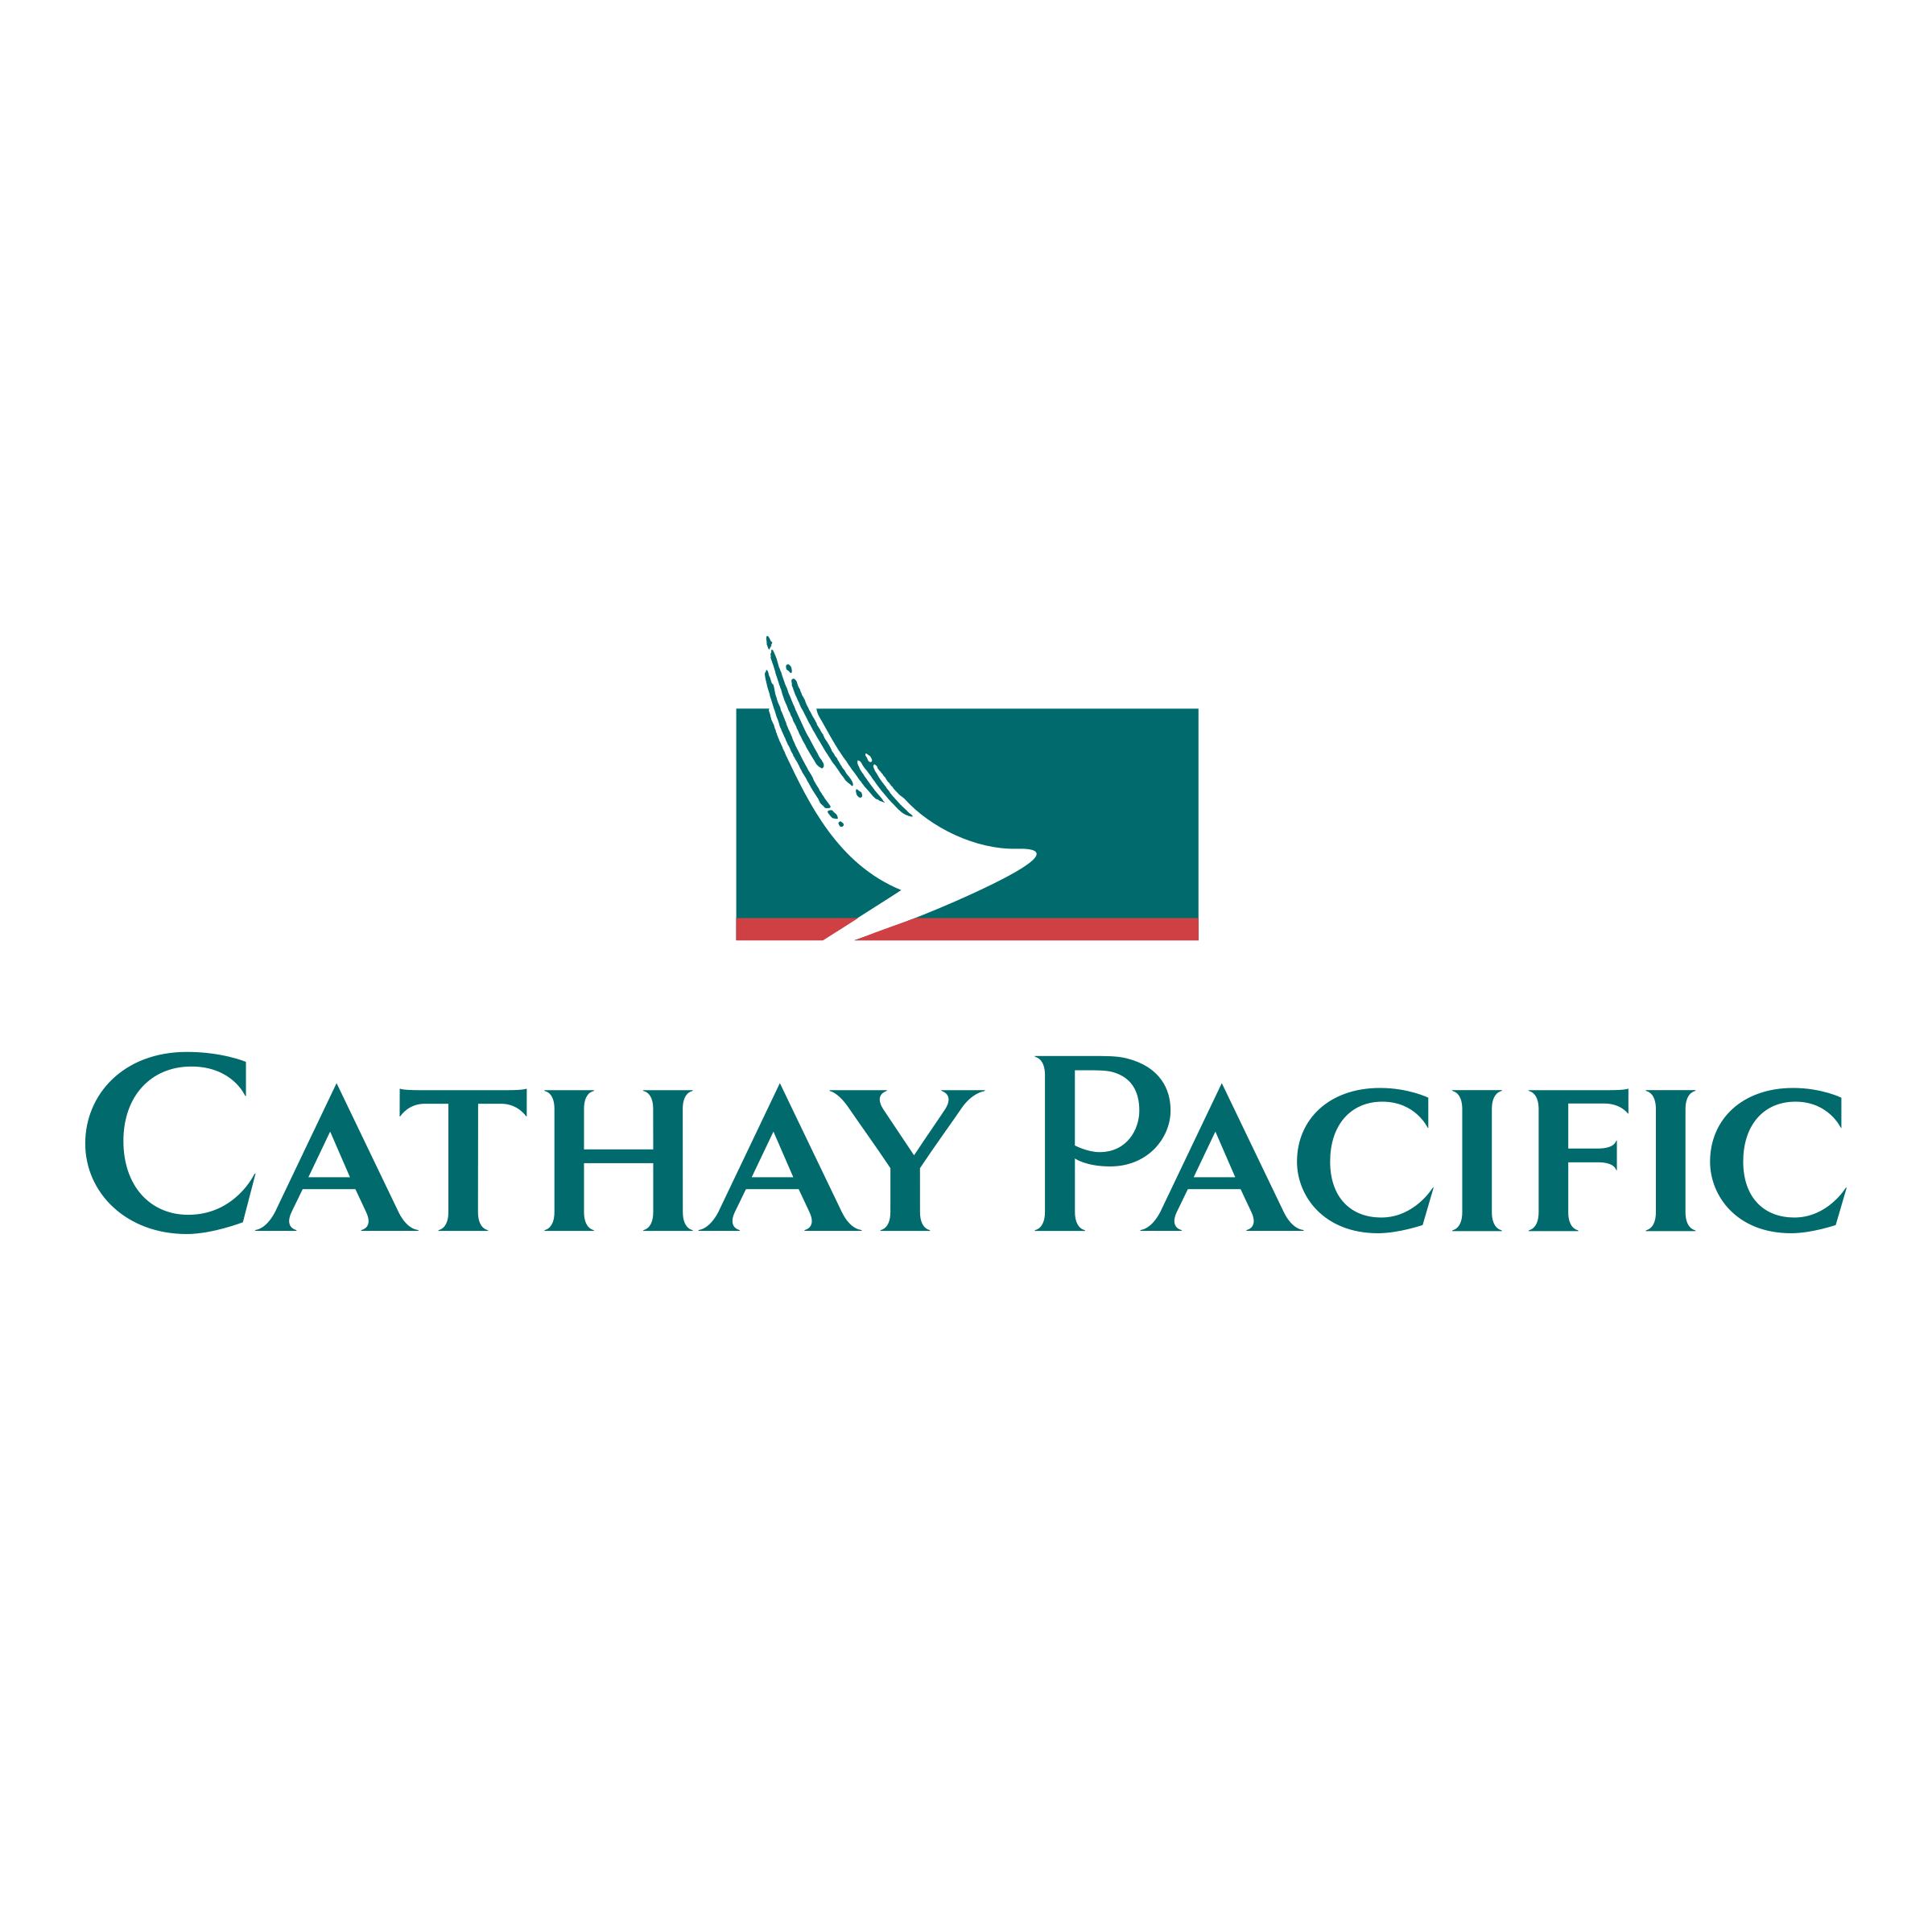 Pacific Logo - Cathay Pacific Logo PNG Transparent & SVG Vector